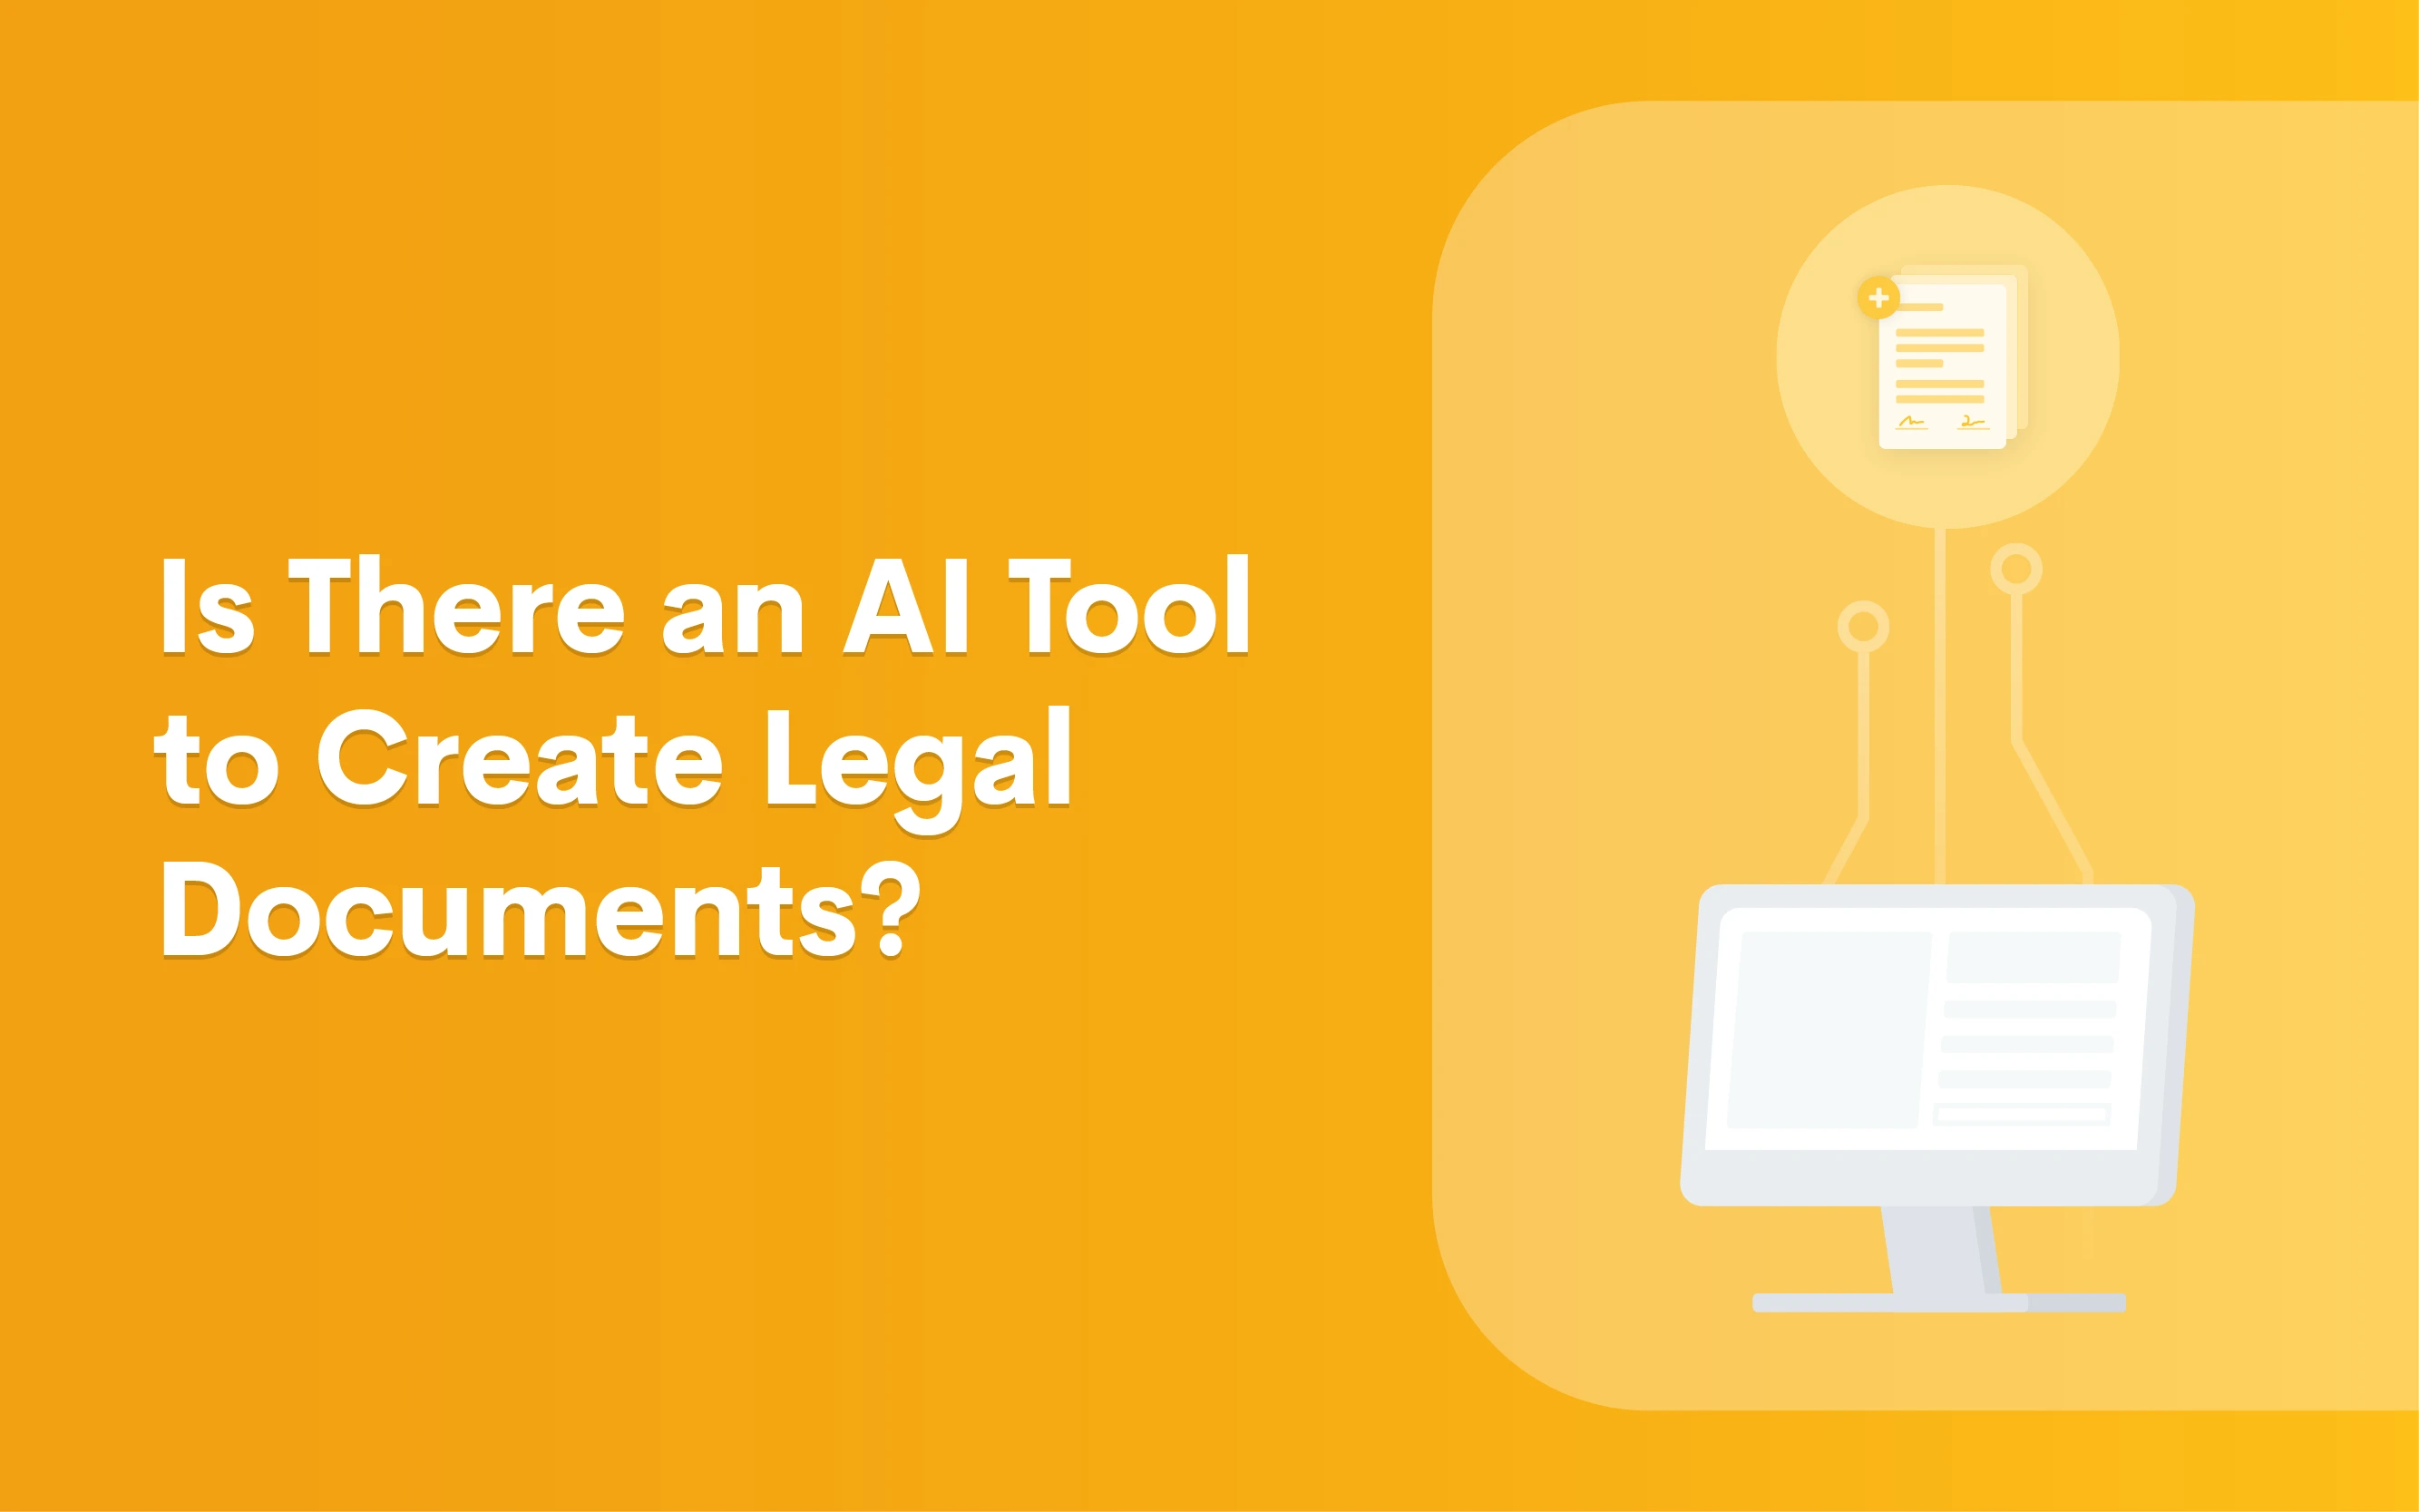 Is There an AI Tool to Create Legal Documents?